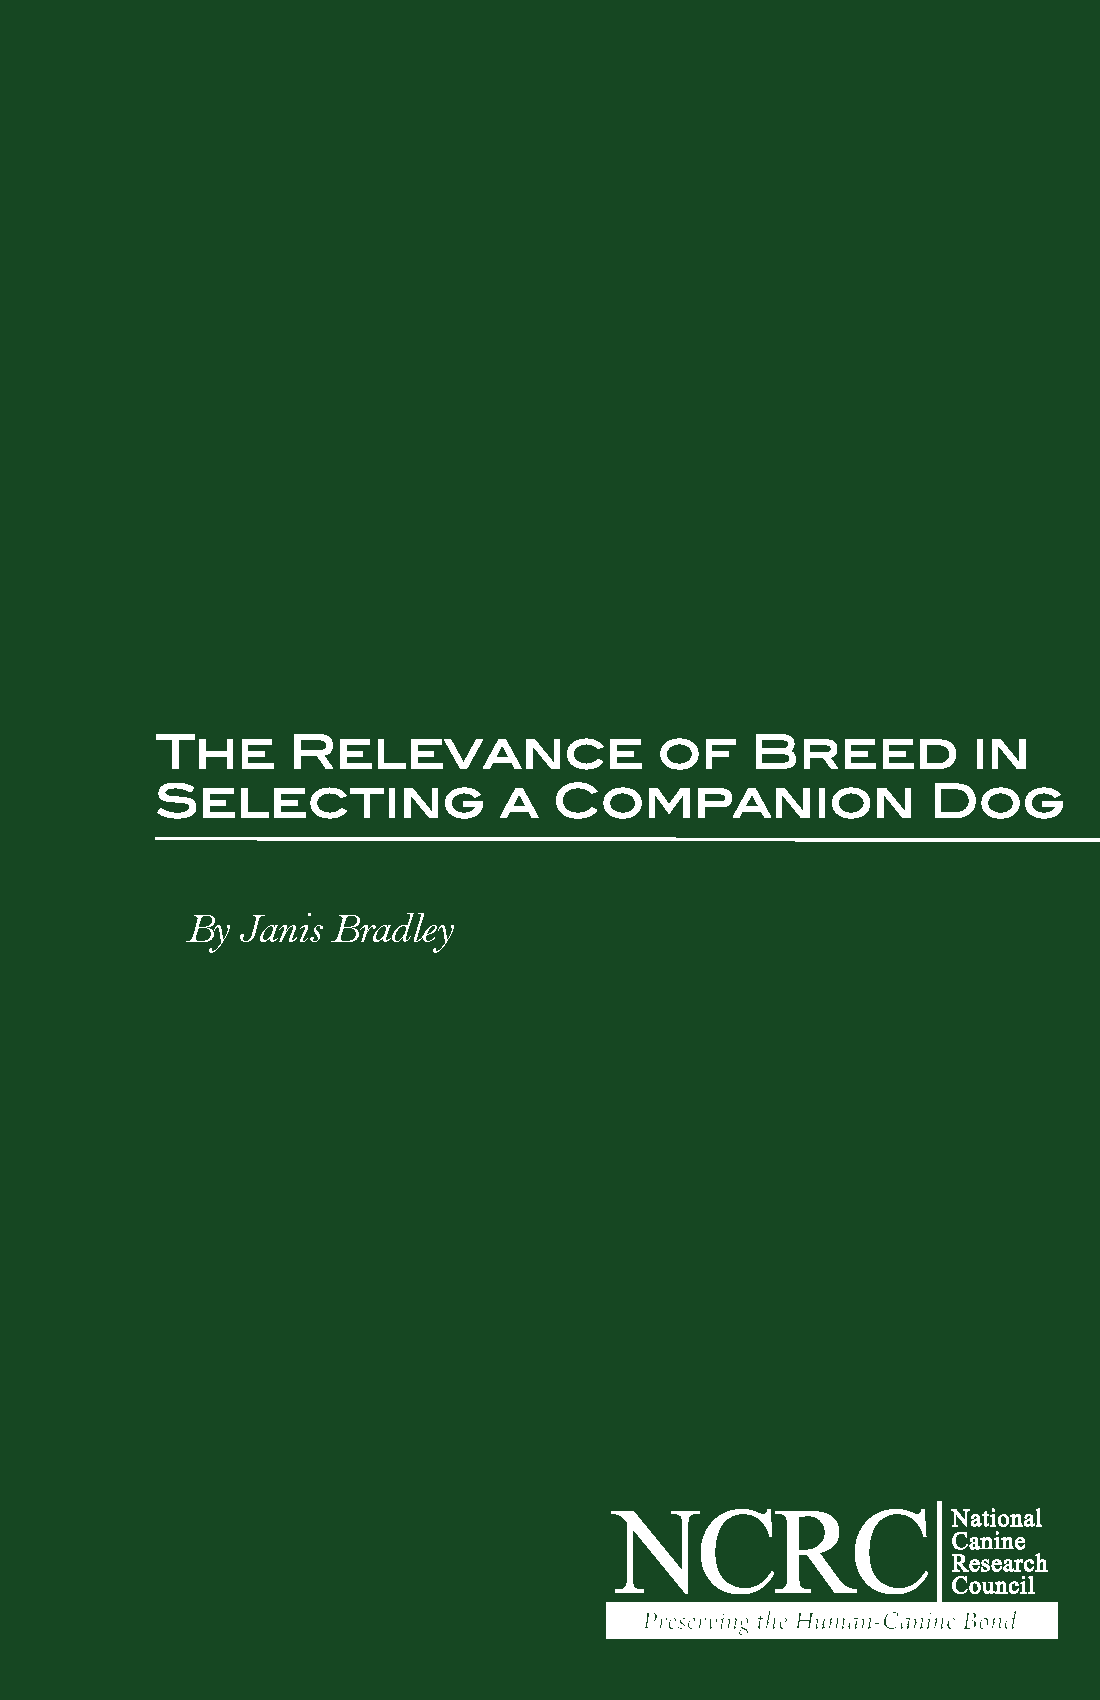 The Relevance of Breed in Selecting a Companion Dog